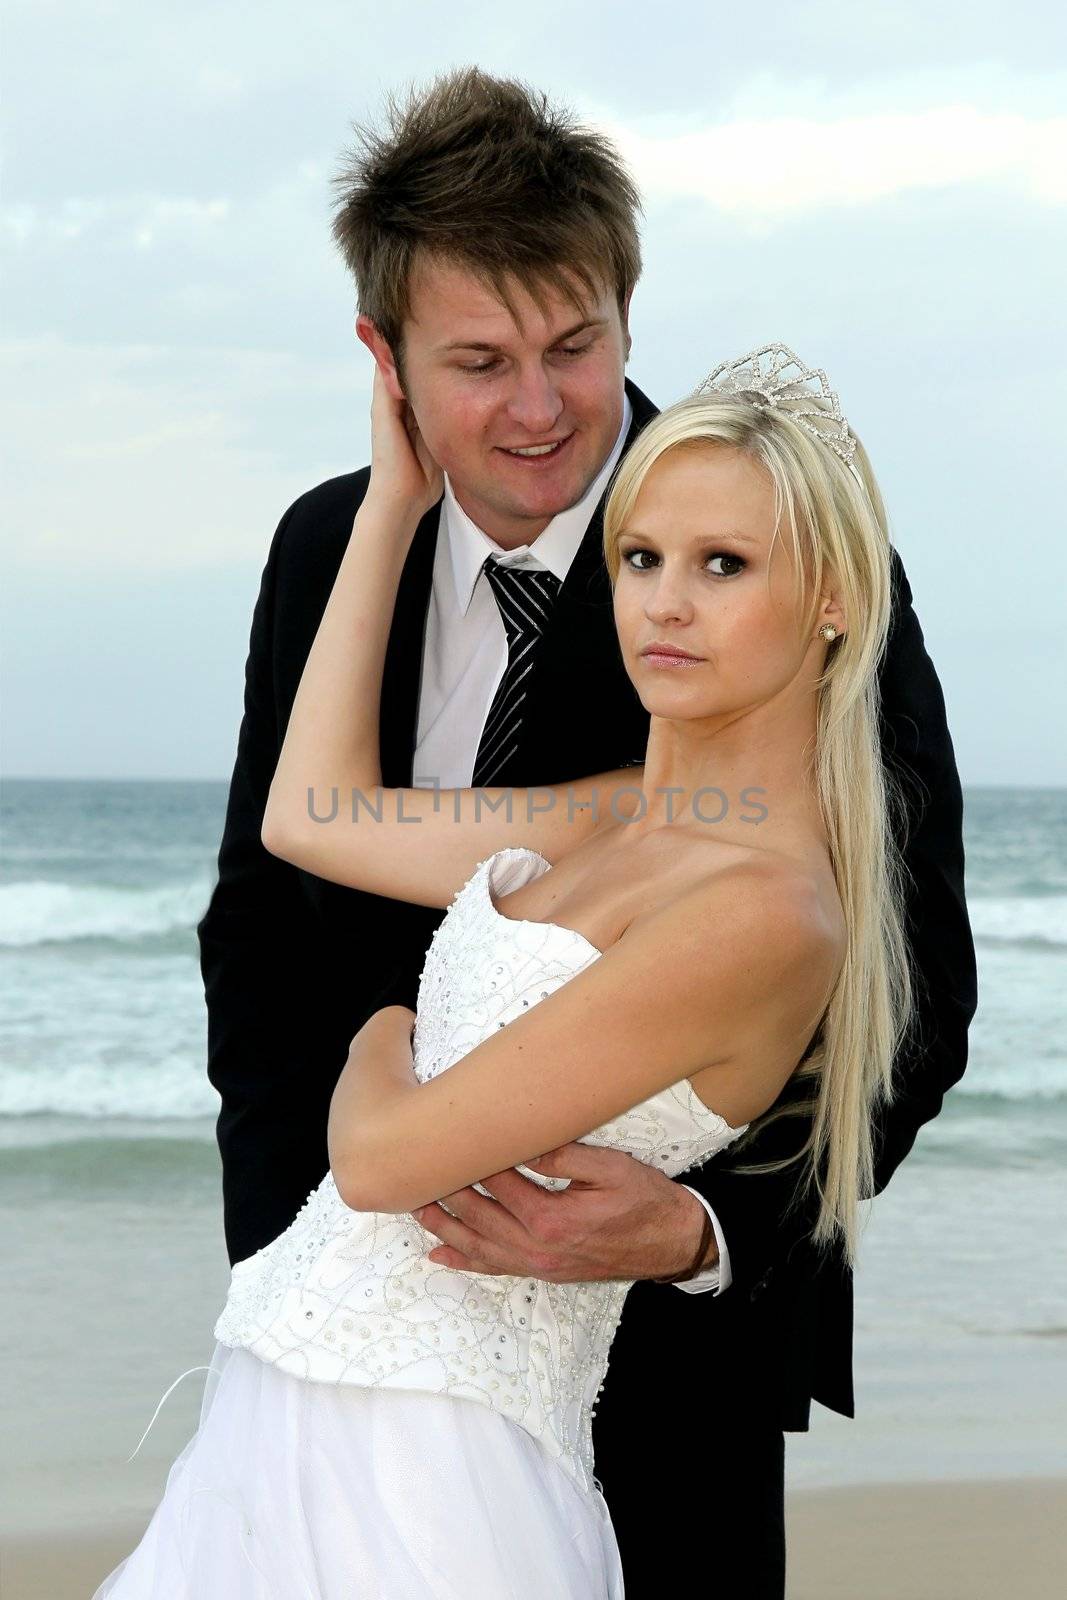 Pretty blond bride and her handsome groom at the sea shore